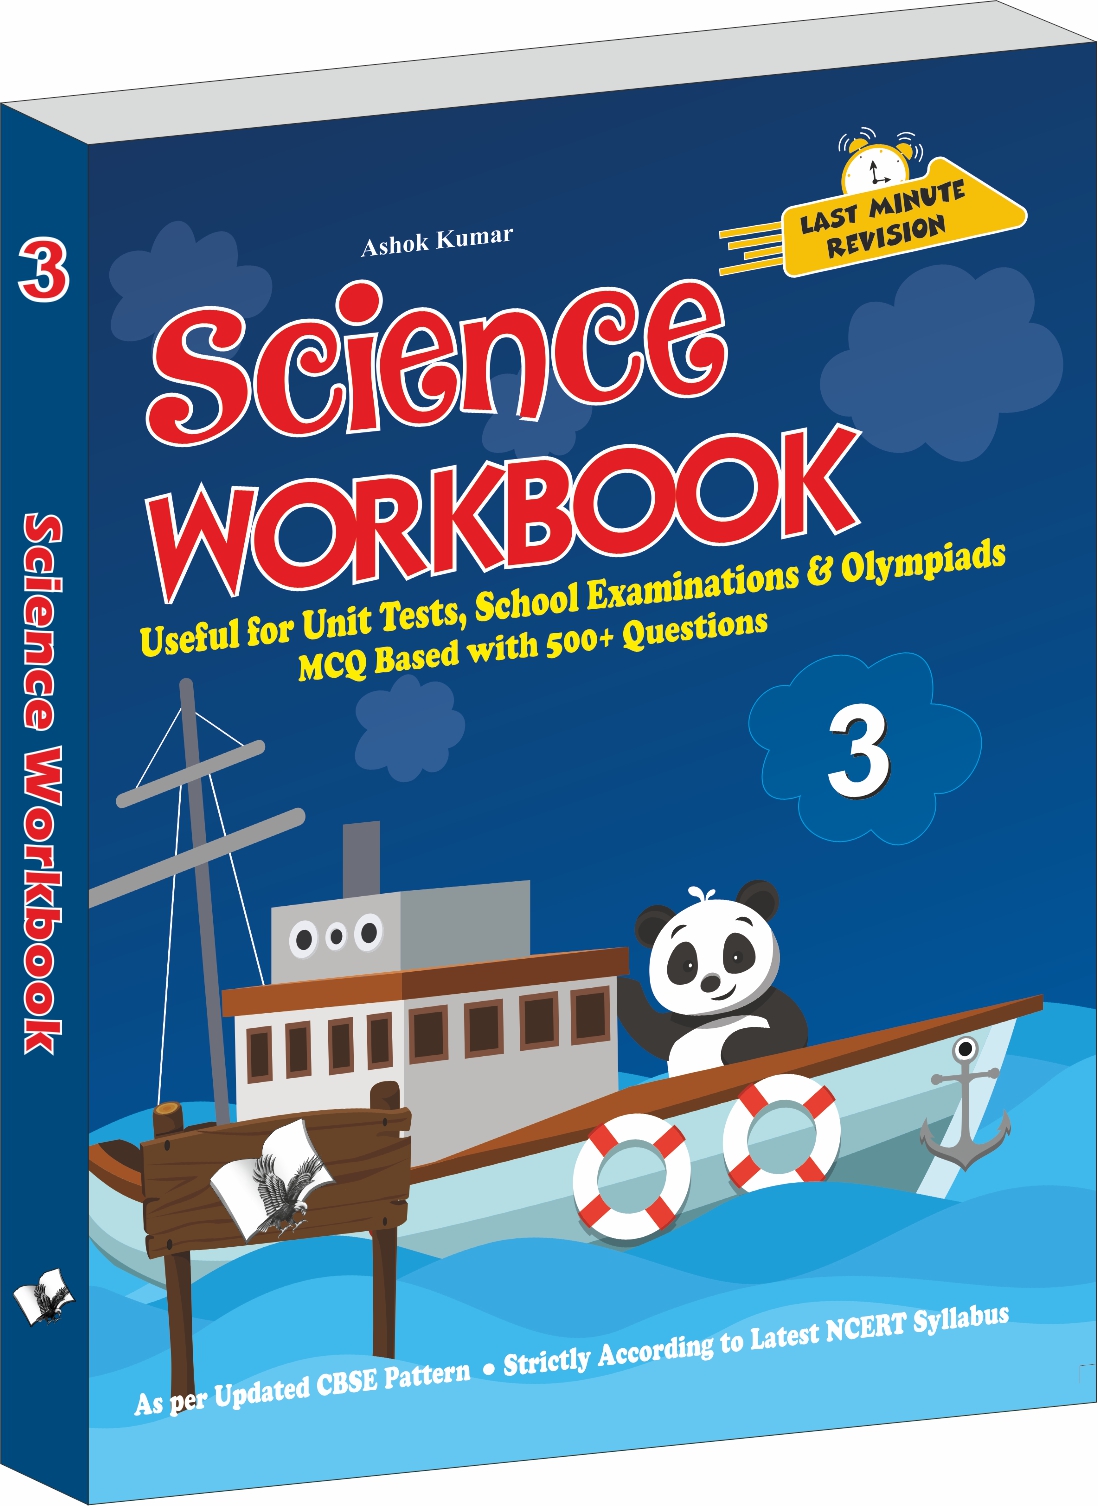 Science Workbook Class 3-Useful for Unit Tests, School Examinations & Olympiads